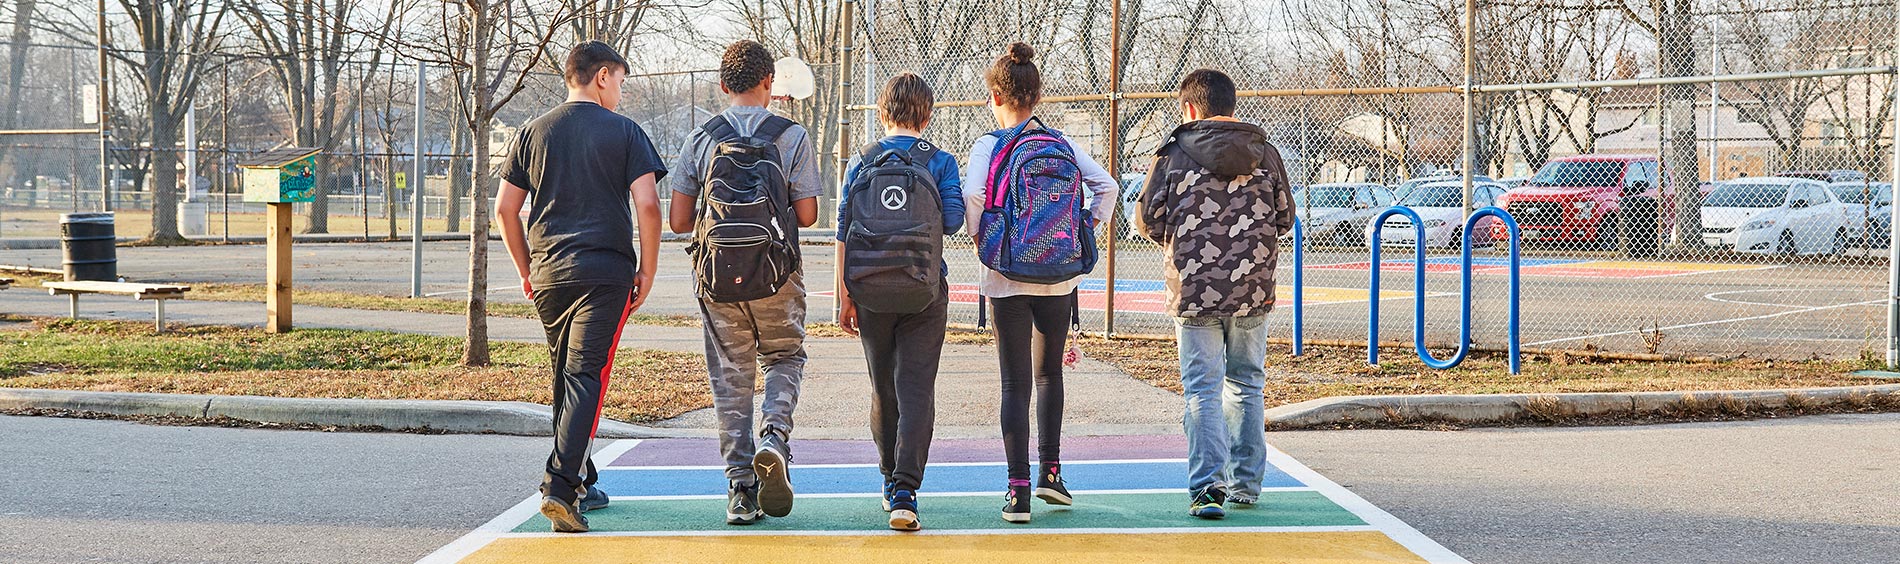 group of teens with backpacks